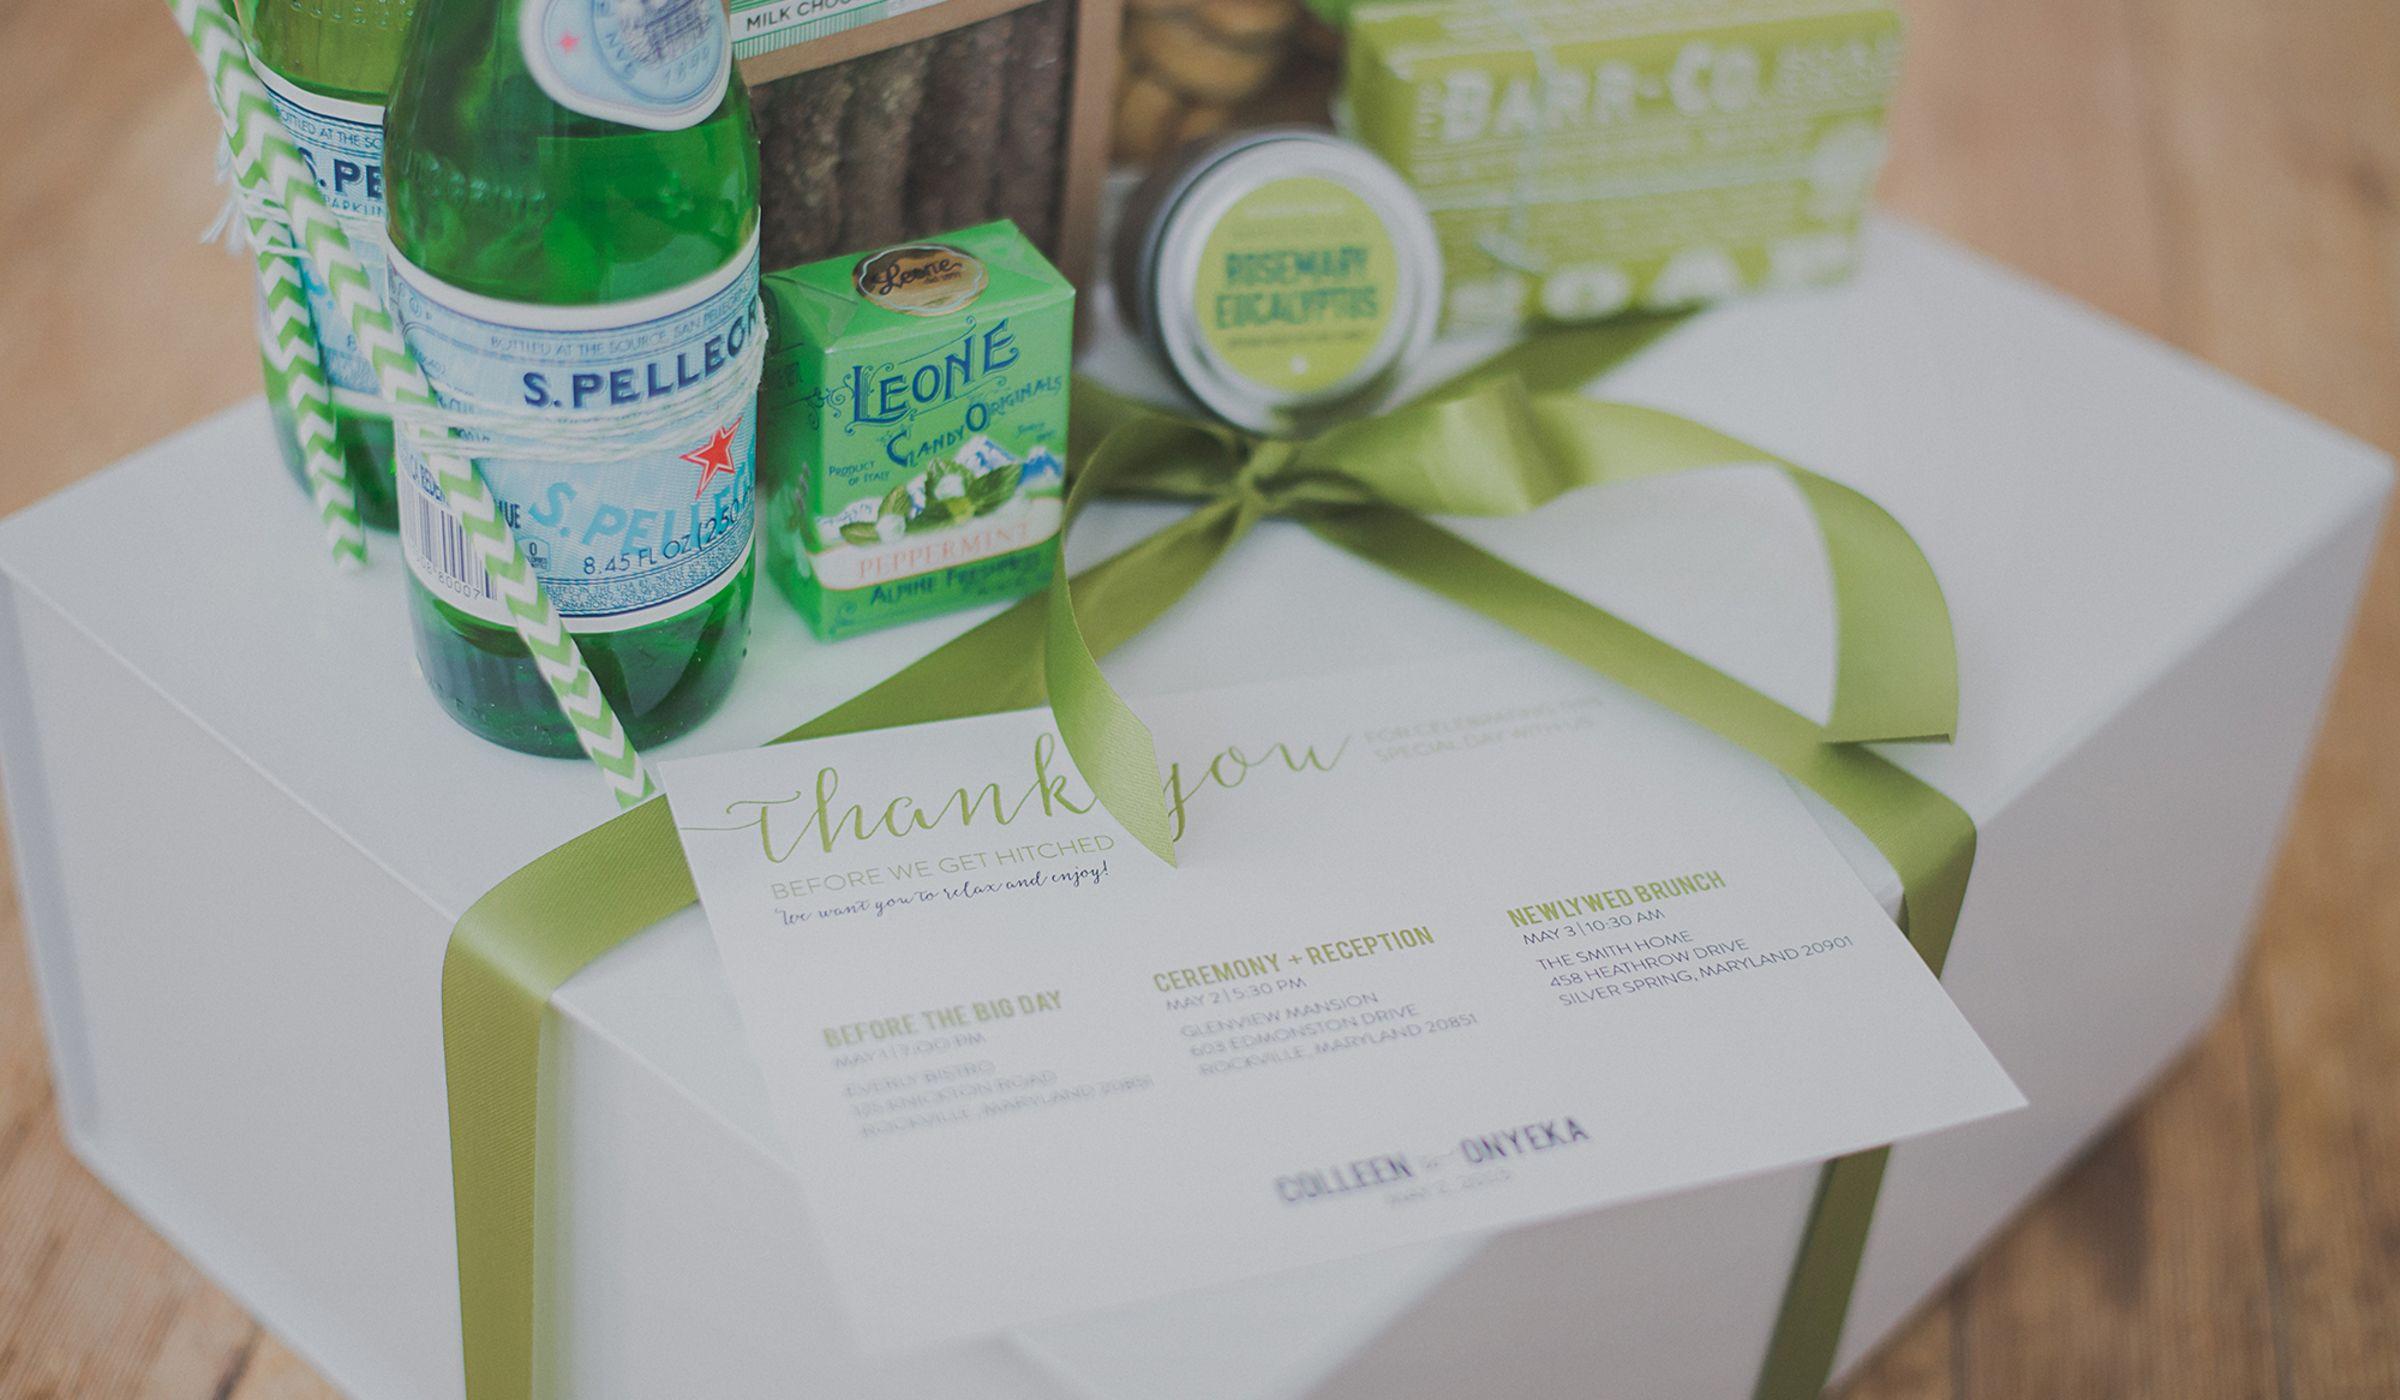 Wedding Shower Host Gift Ideas
 18 Bridal Shower Hostess Gifts That Are Bud Friendly